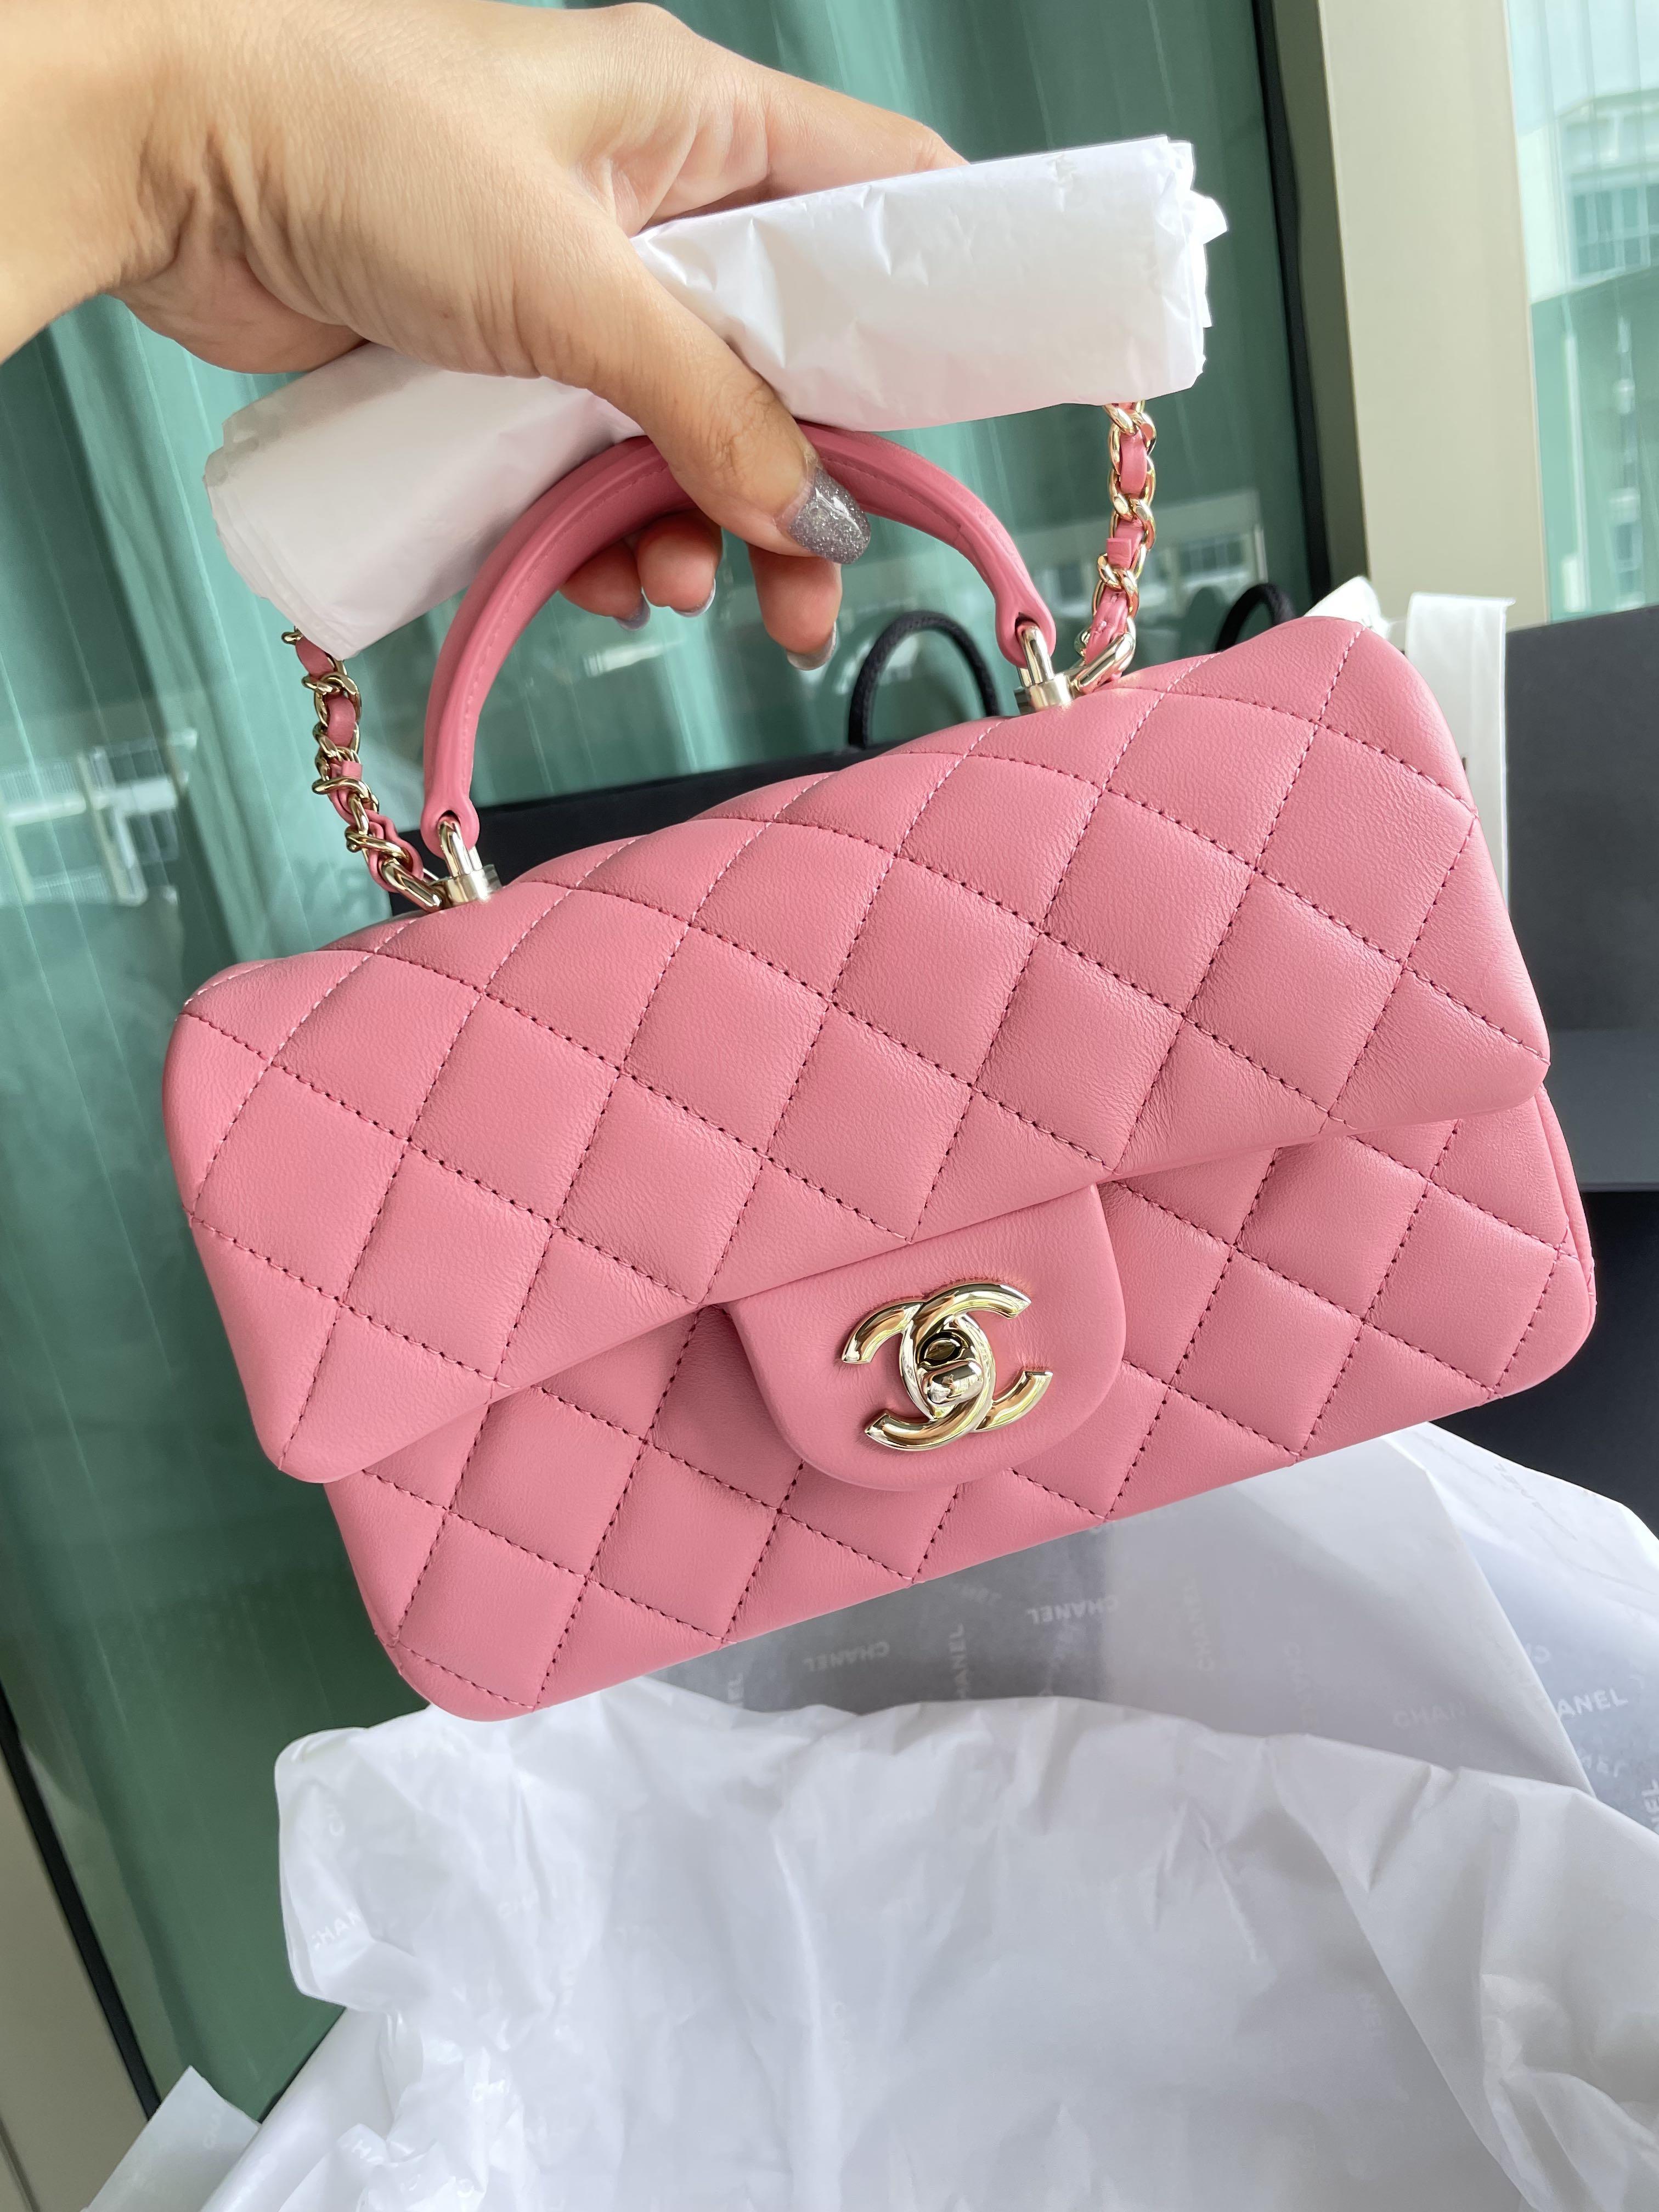 Pin on Chanel bags